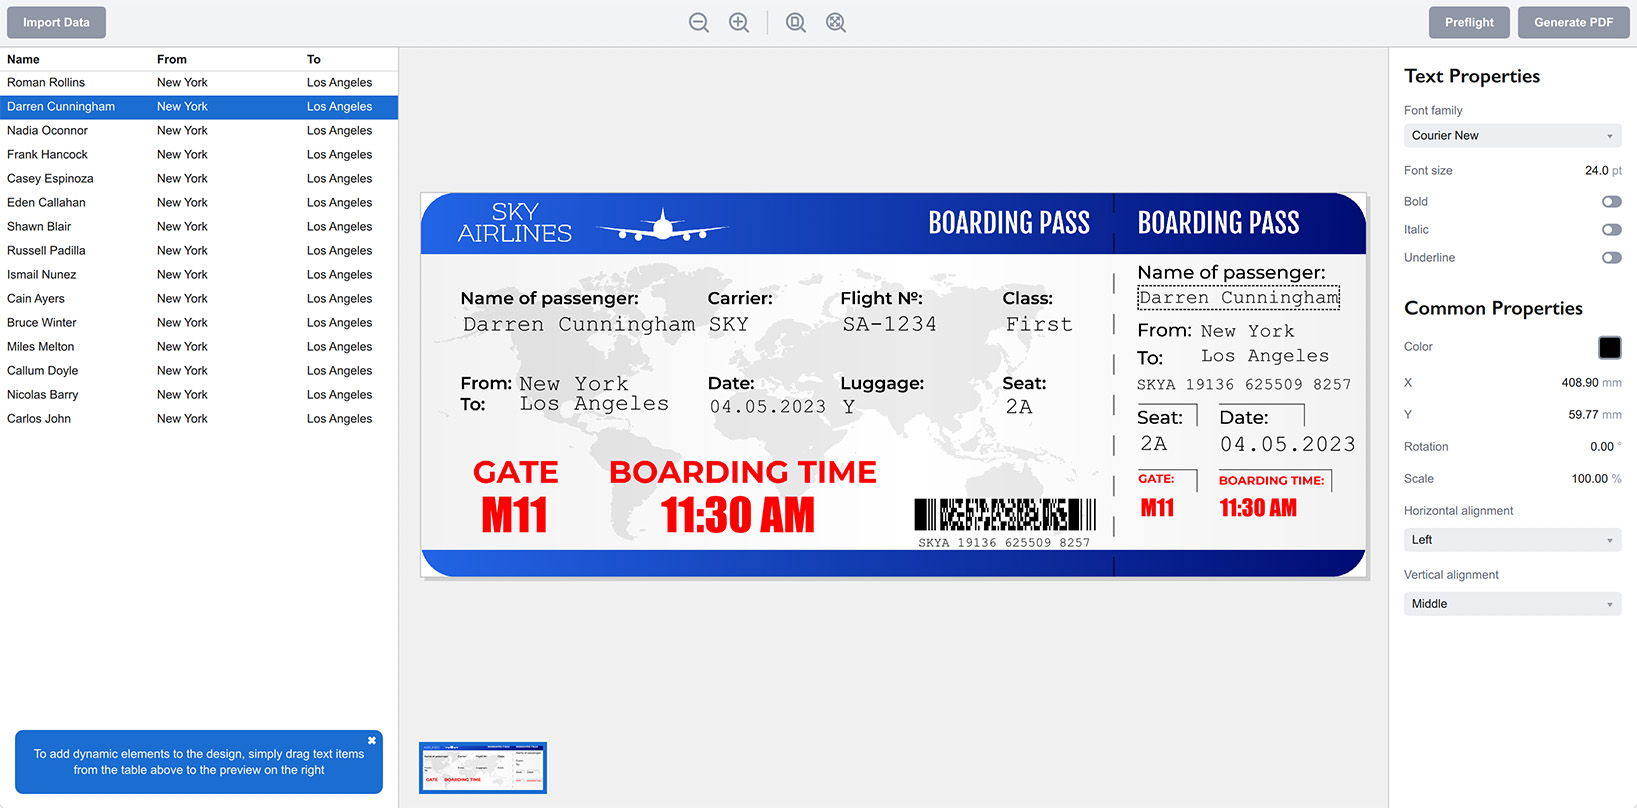 Boarding Pass example made in Ticket Wizard